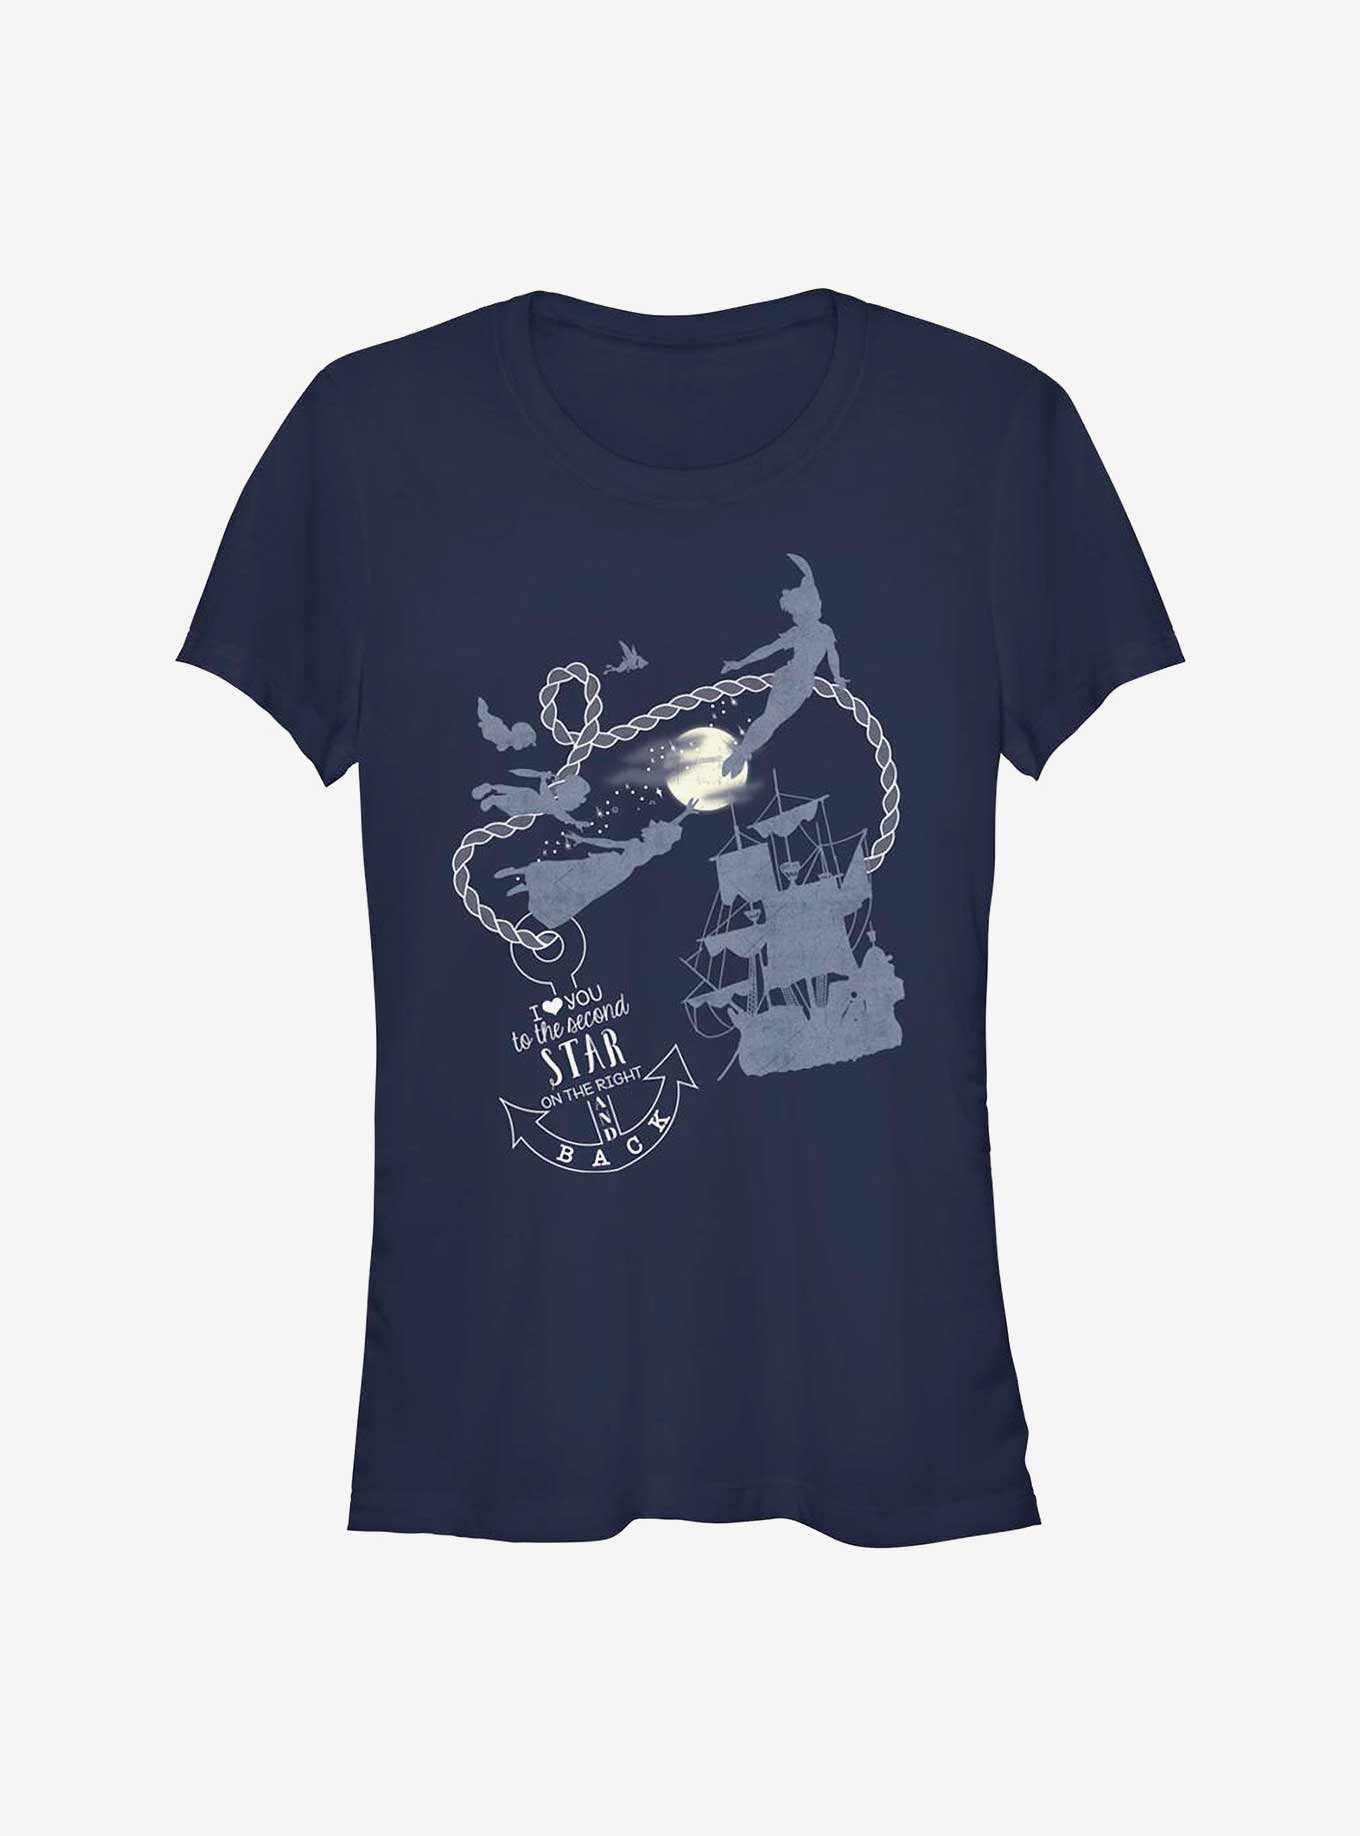 Disney Peter Pan To The Second Star And Back Girls T-Shirt, , hi-res